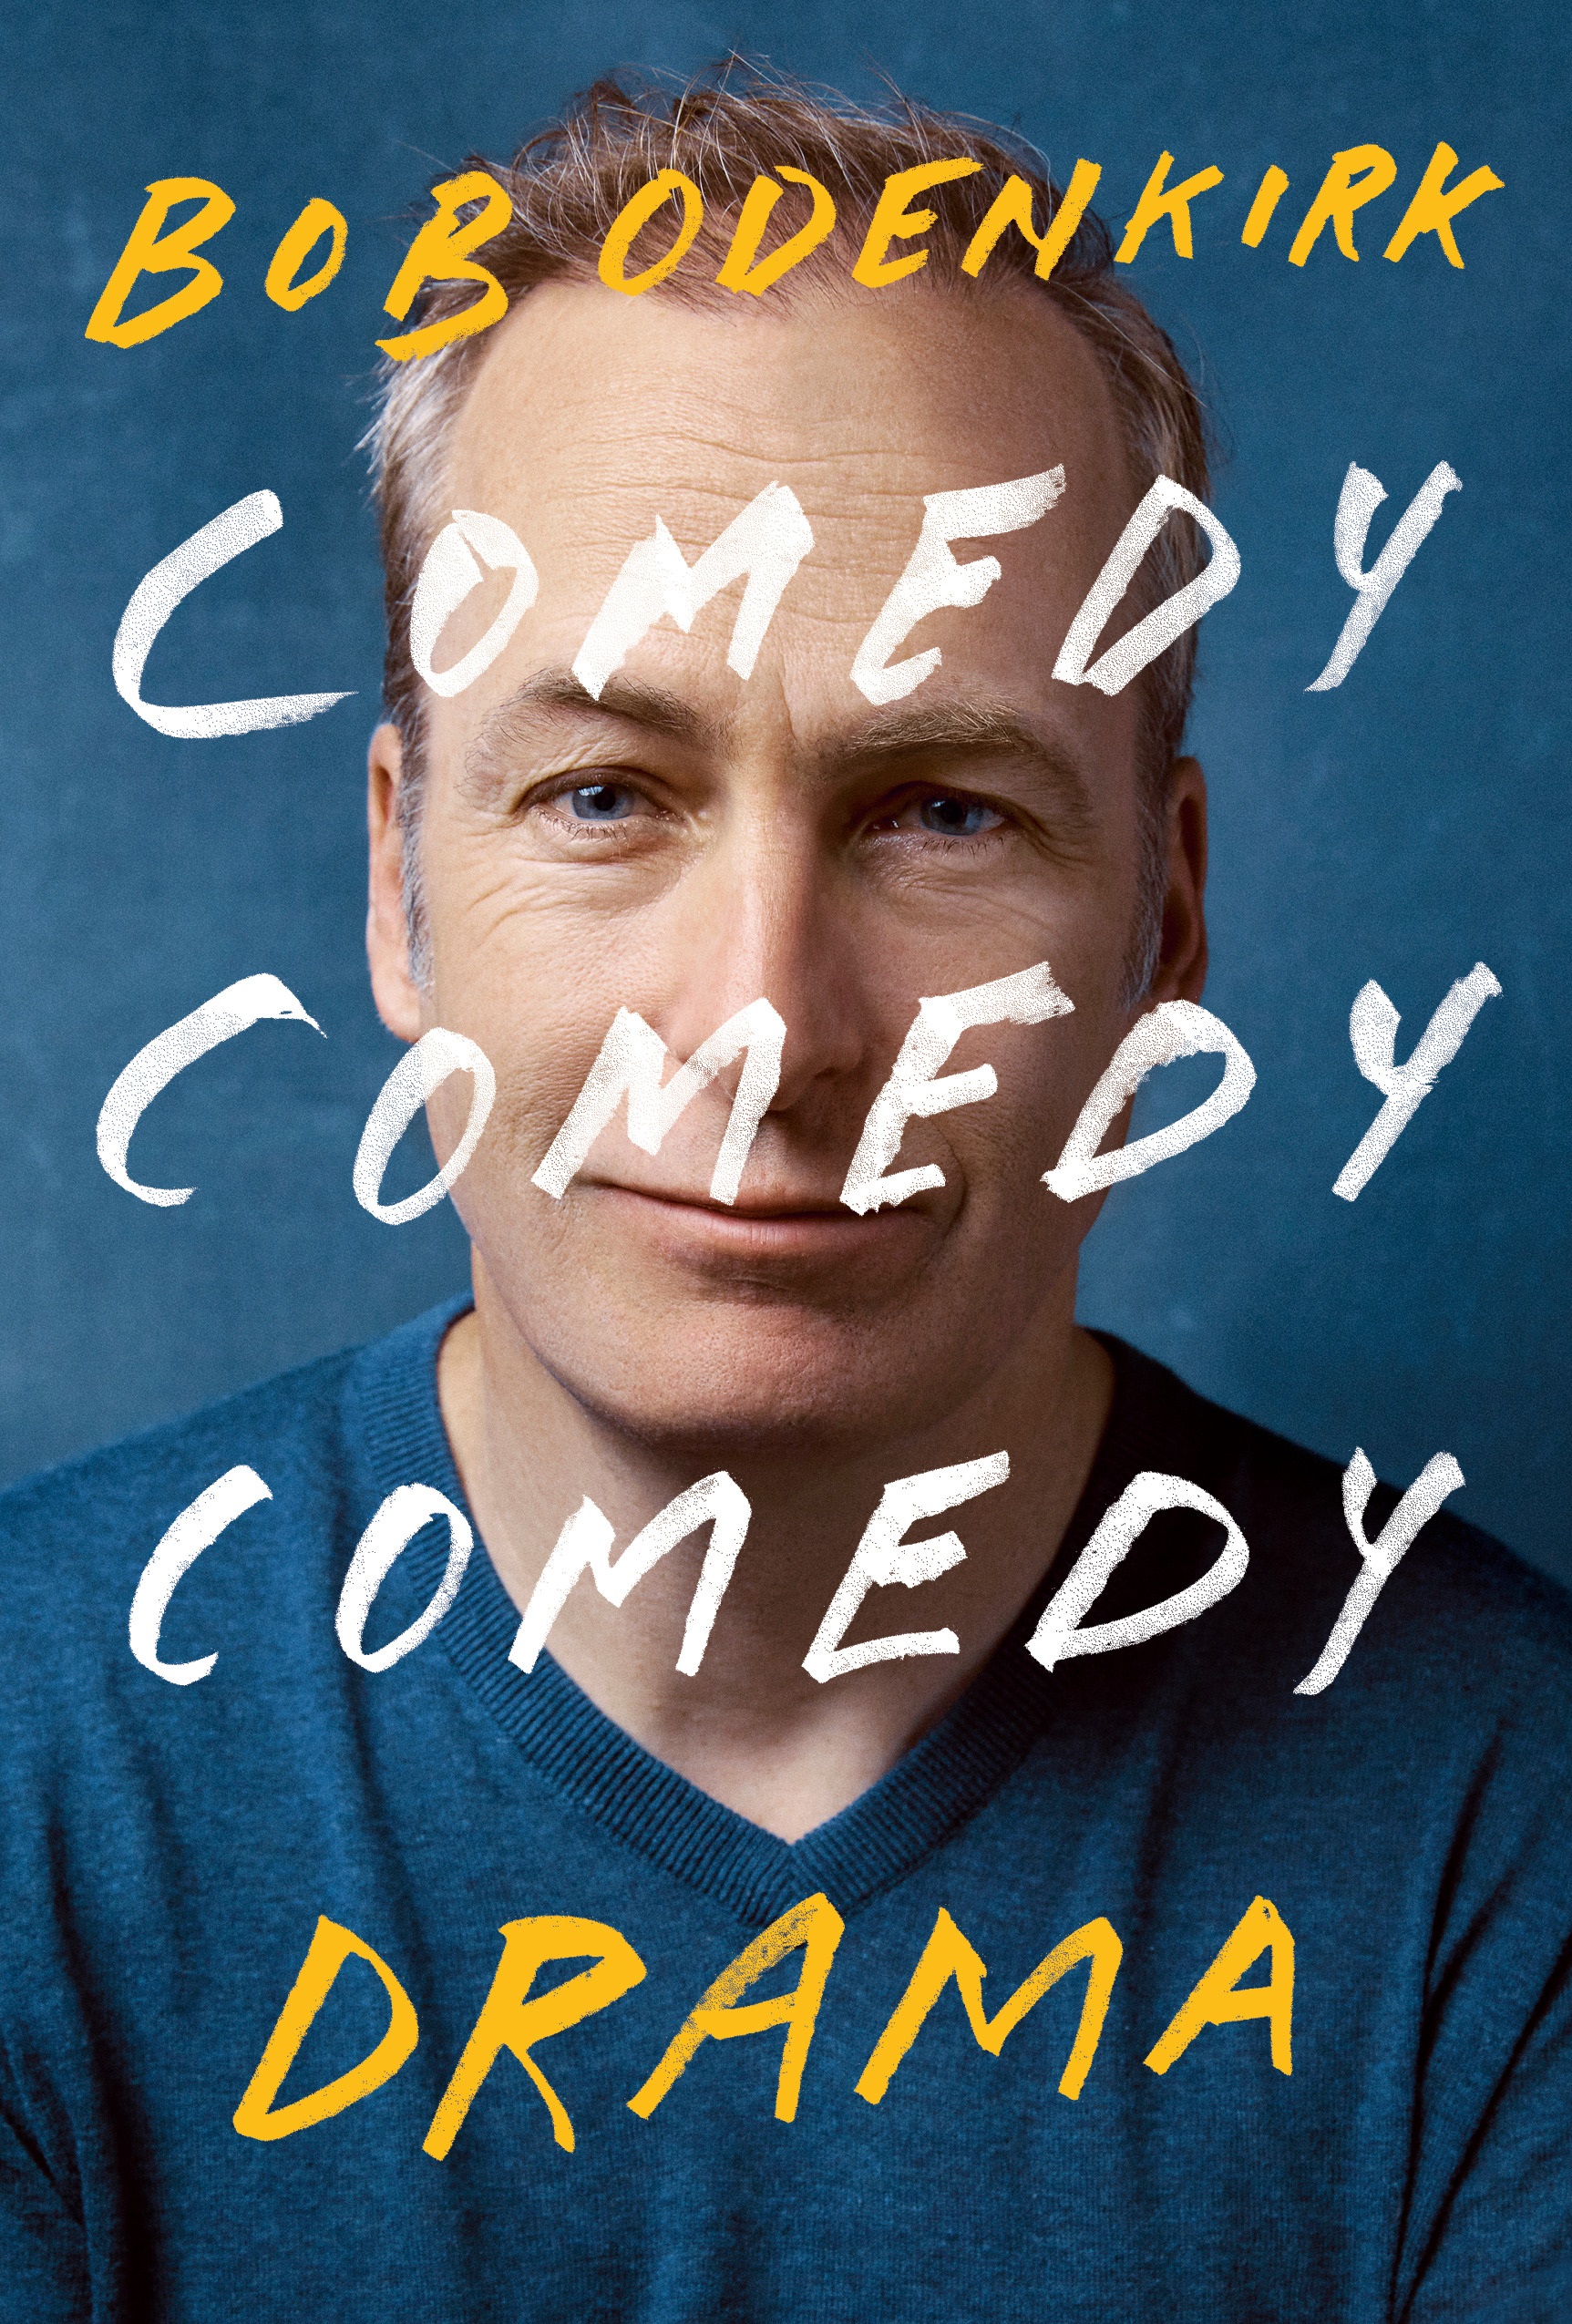 In-Person Event with Bob Odenkirk/Comedy Comedy Comedy Drama